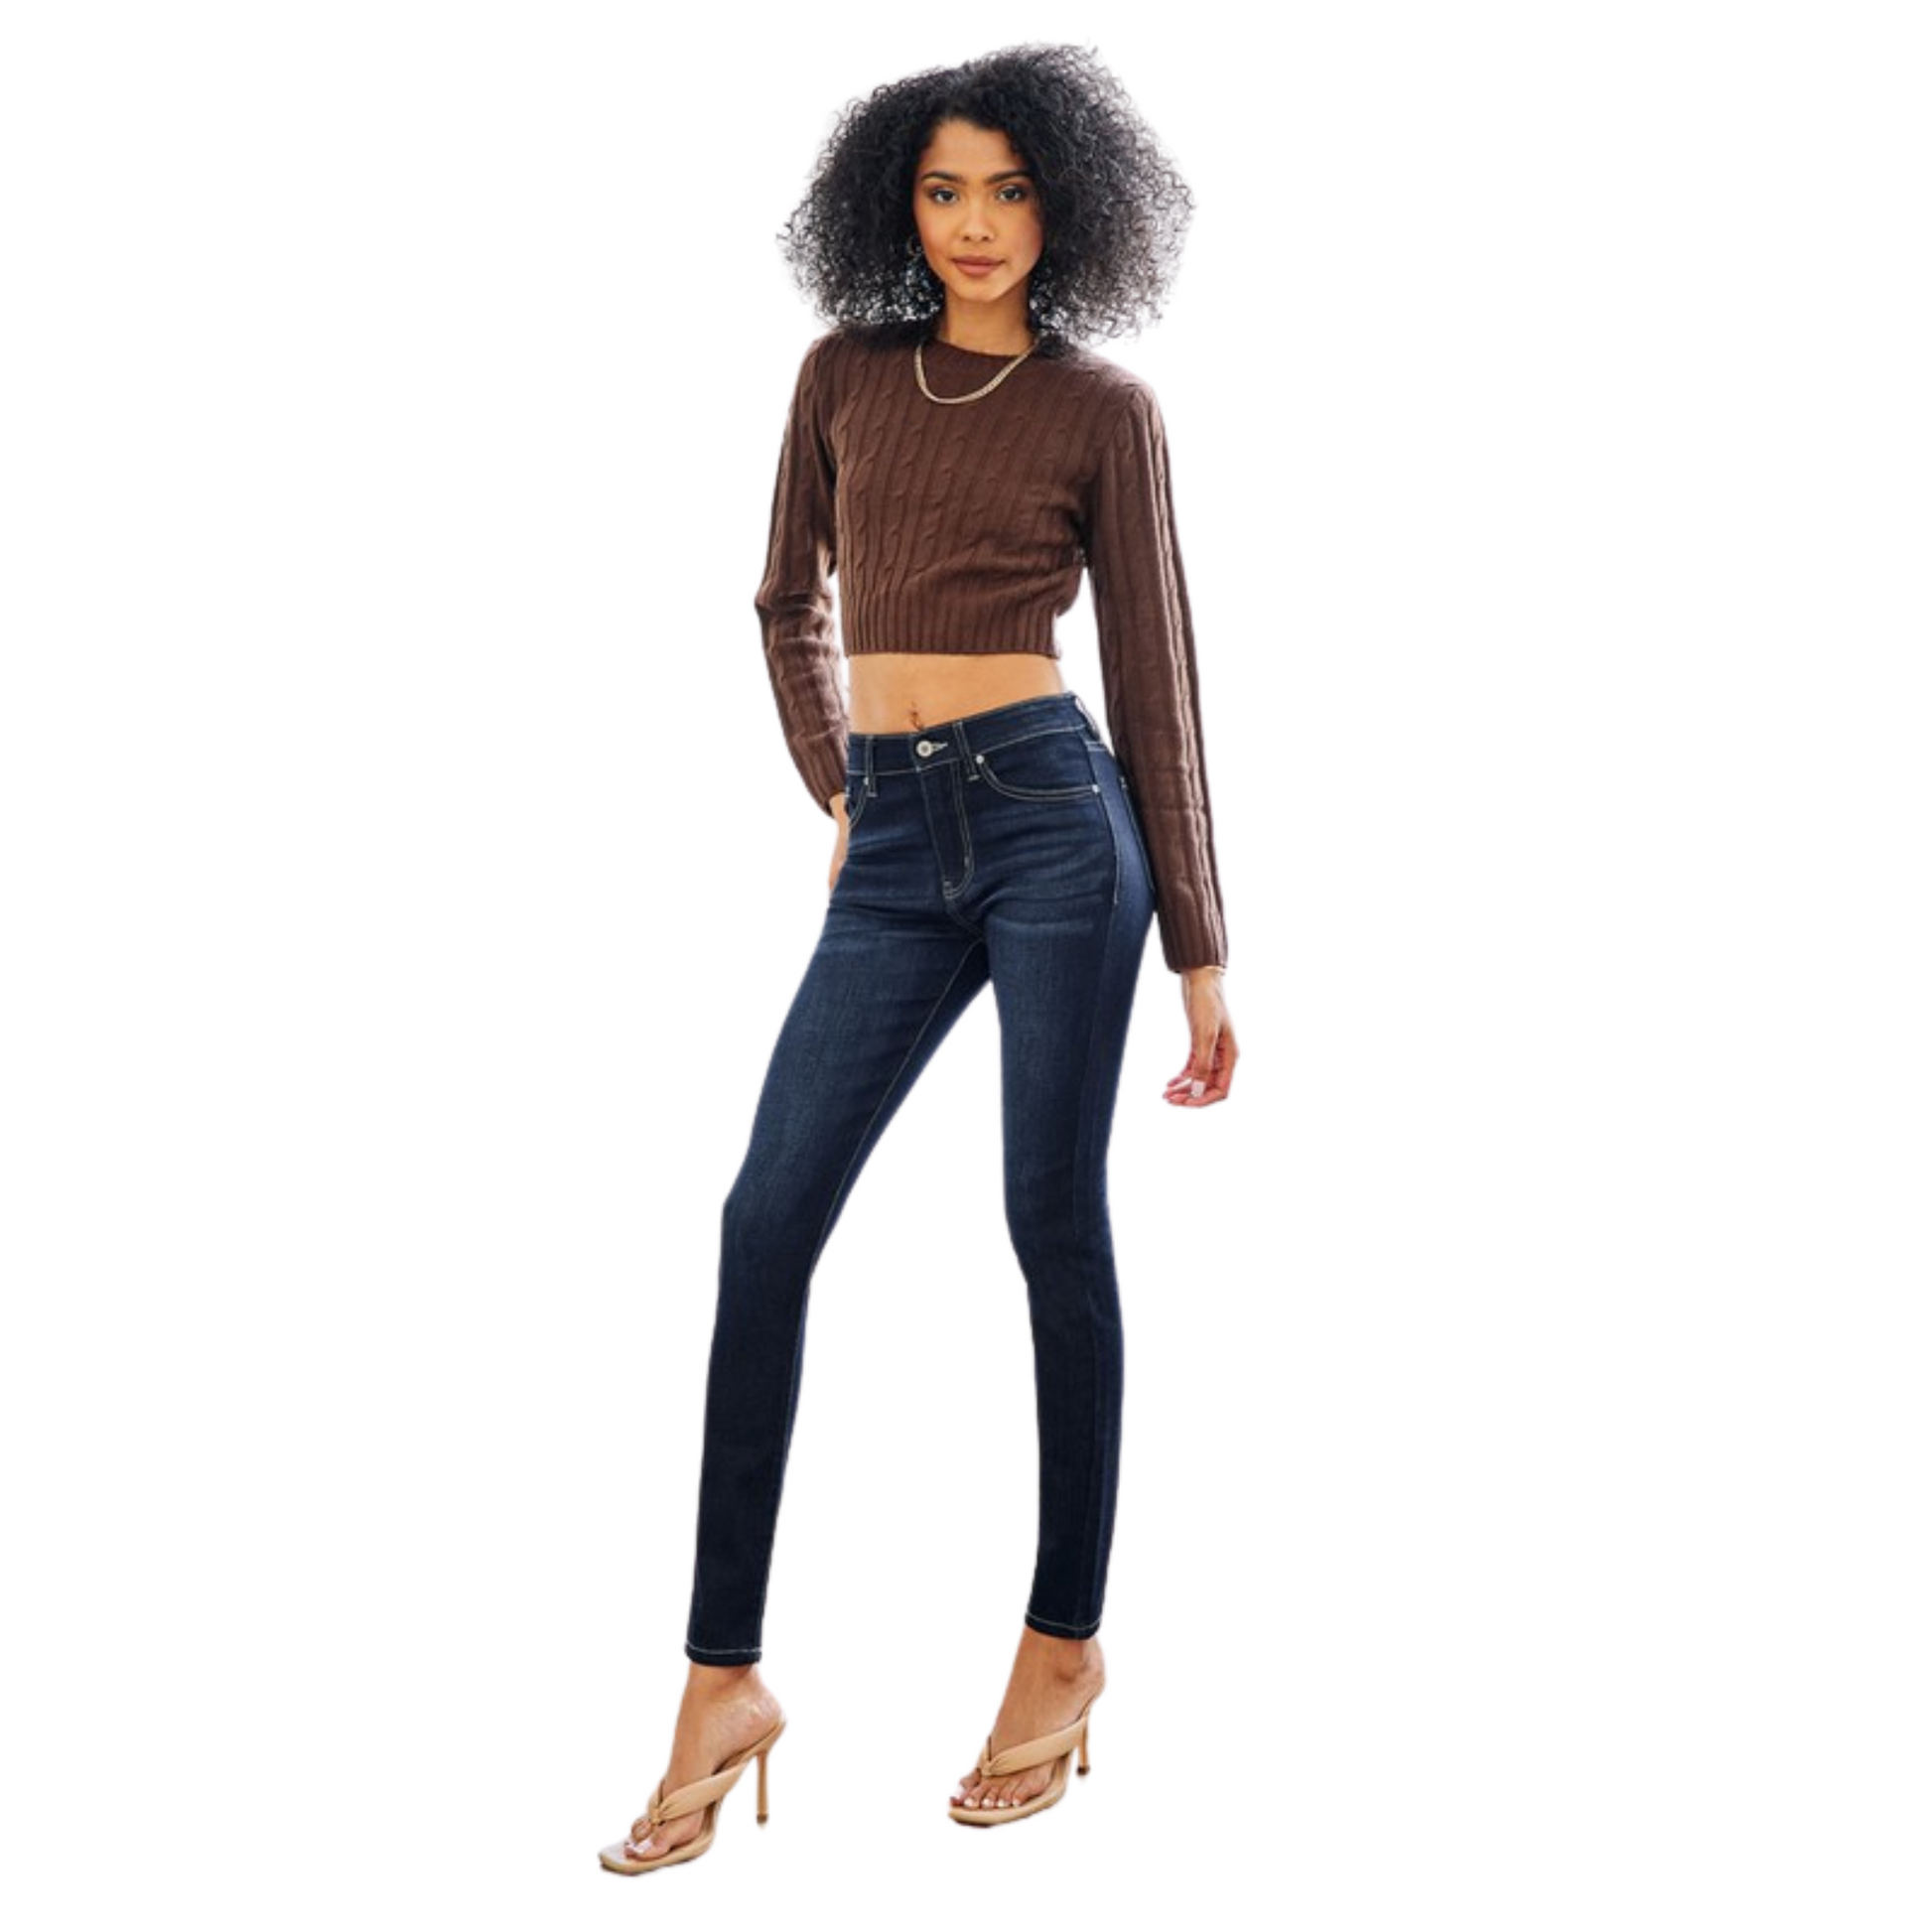 These High Rise Super Skinny Jeans have a dark wash, providing a sleek and stylish look. Crafted for a perfect fit and enhanced comfort, these jeans are designed with a skinny silhouette to flatter any figure.